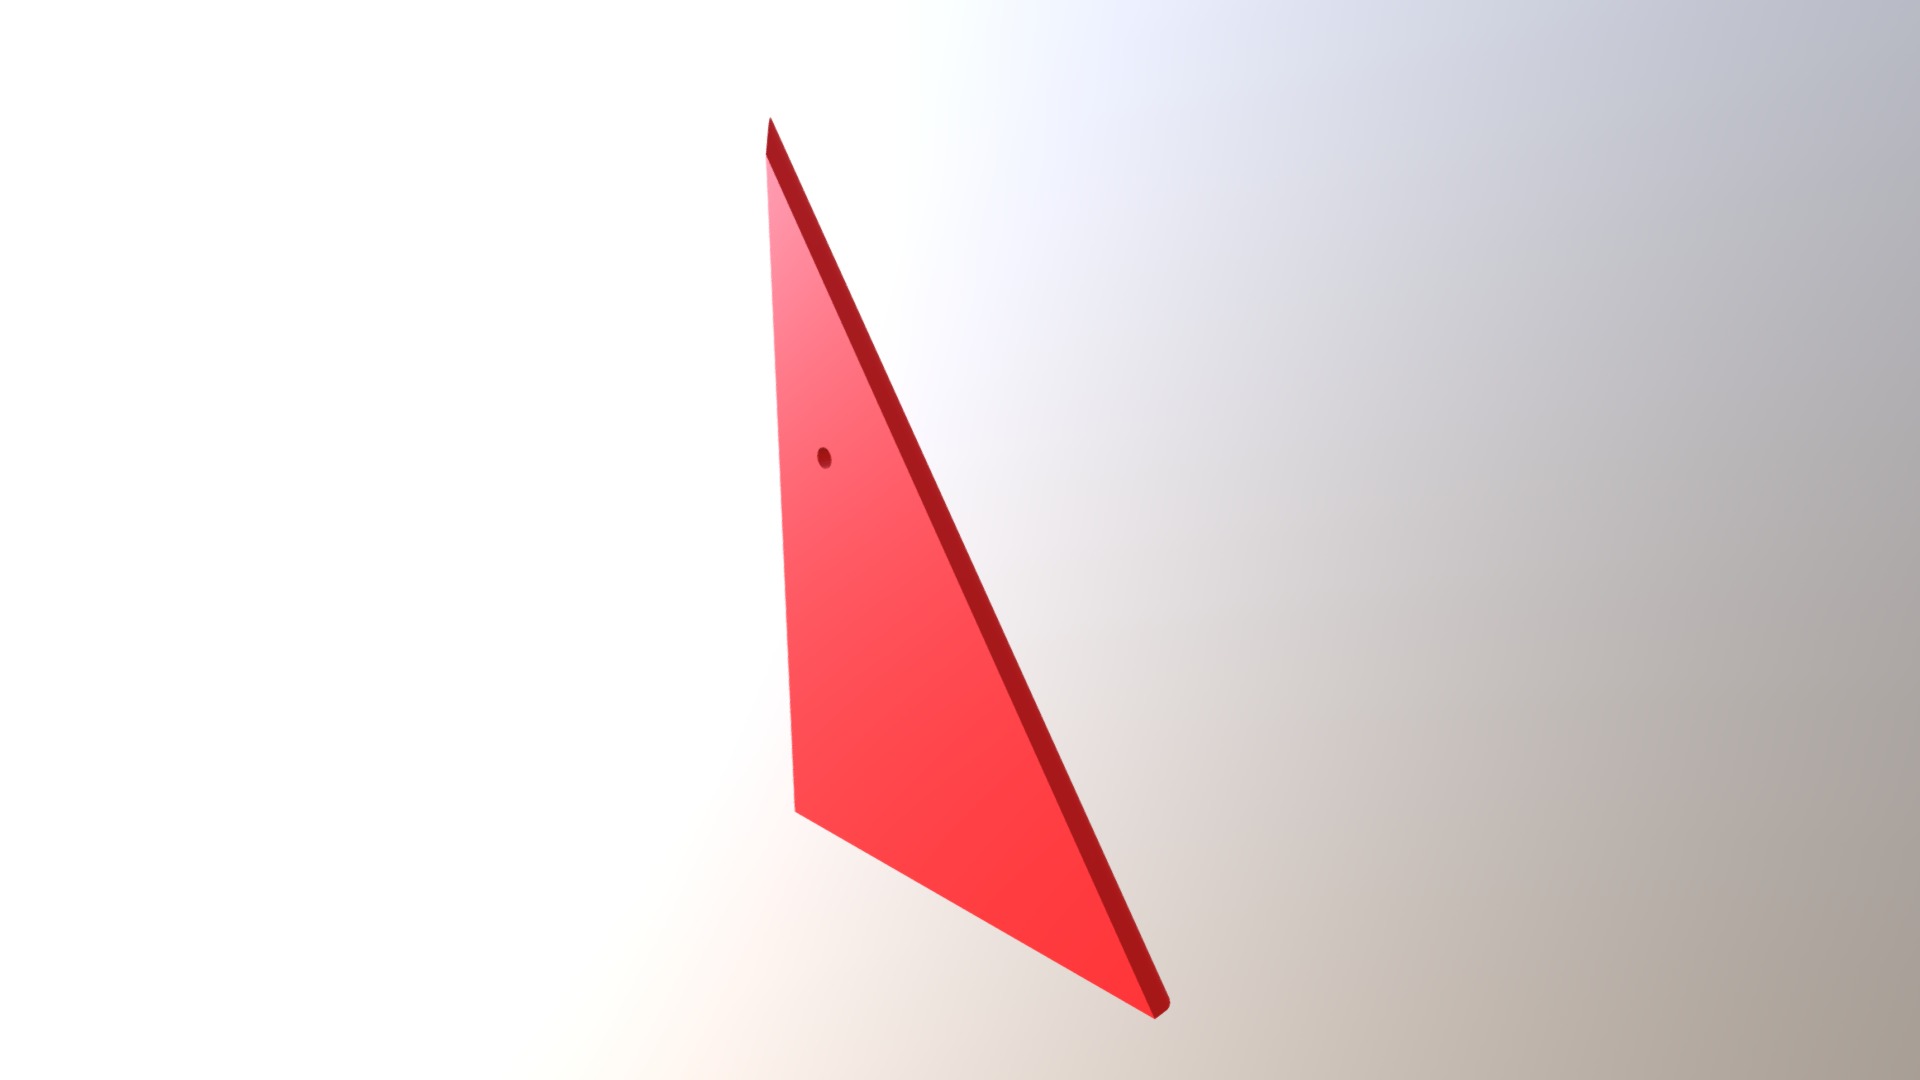 3D model Prism P7 – Dock Part (Top LEFT Wall) - This is a 3D model of the Prism P7 - Dock Part (Top LEFT Wall). The 3D model is about a red triangle with a white background.